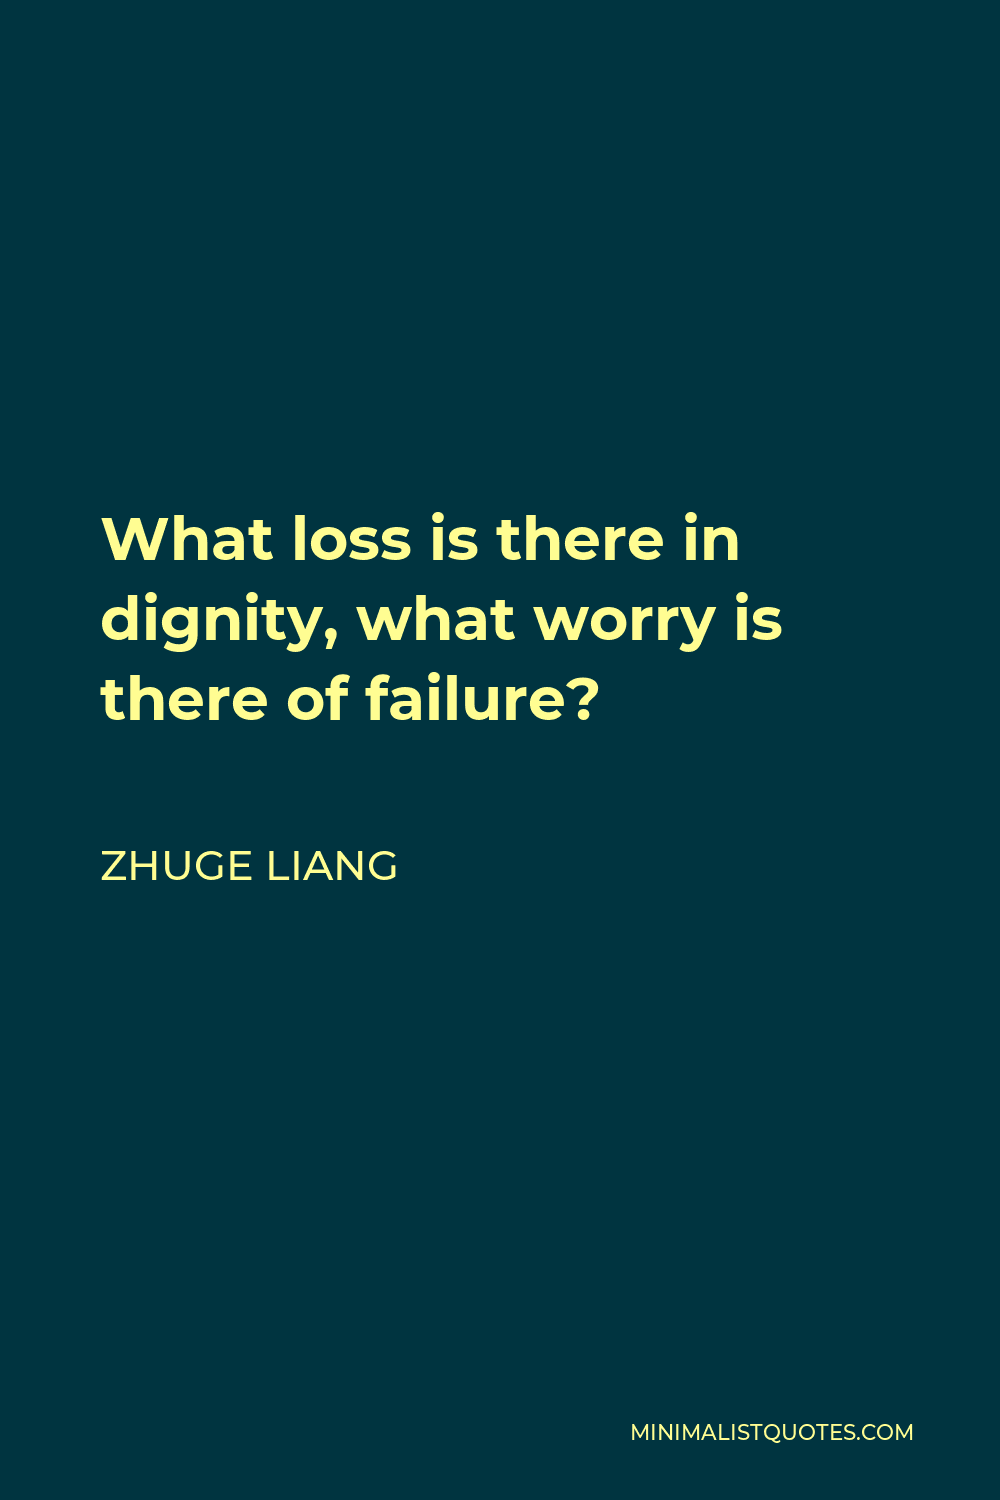 Zhuge Liang Quote - What loss is there in dignity, what worry is there of failure?